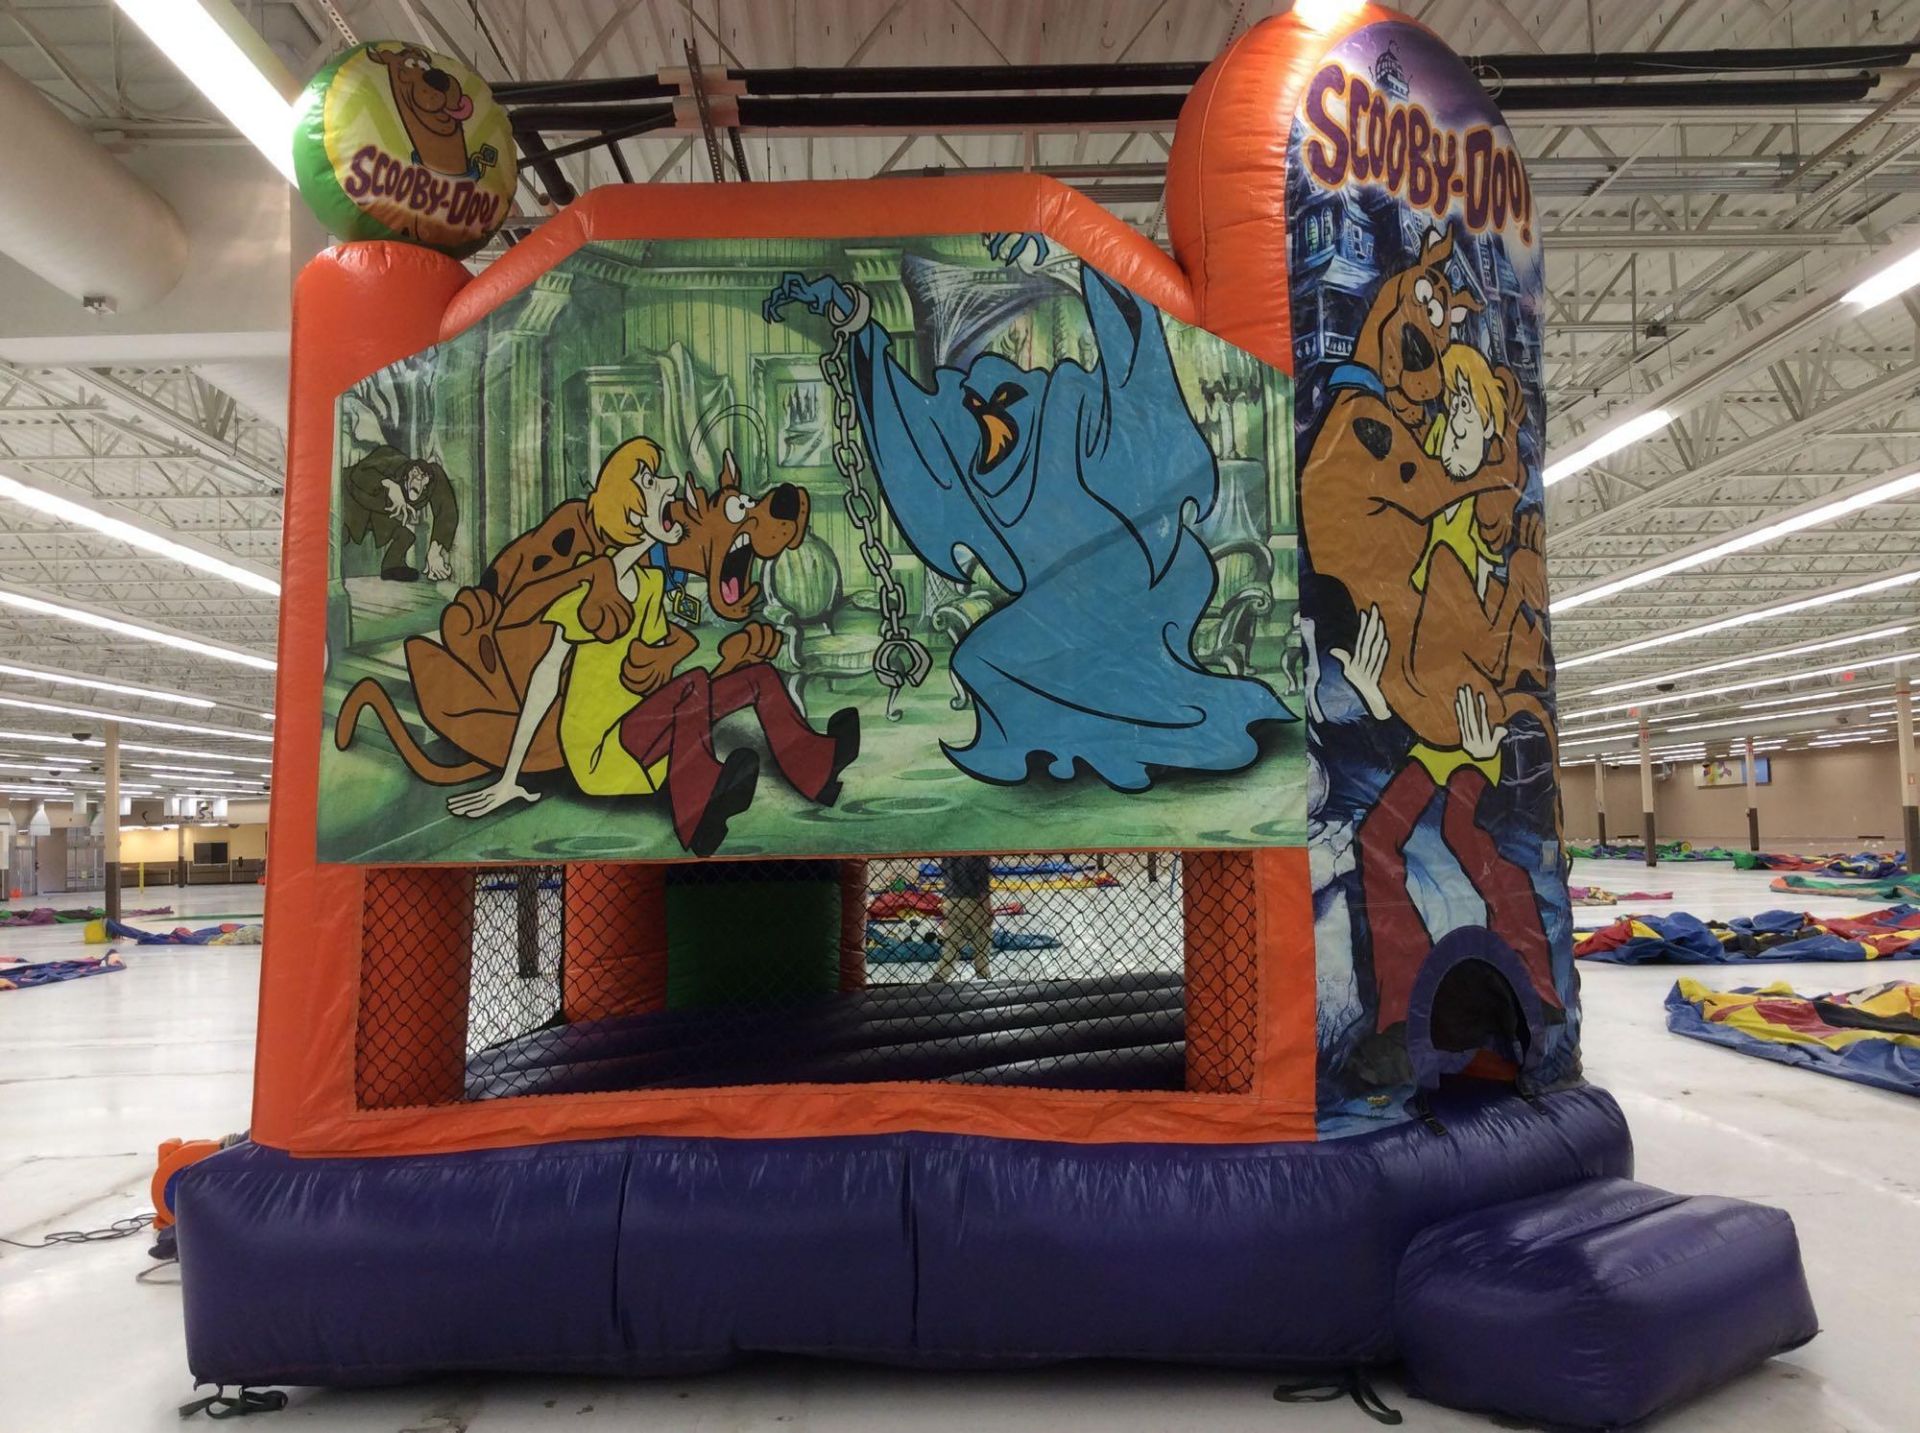 Scooby-Doo inflatable bounce house, approx. 15' x 15', with blower - Image 2 of 3